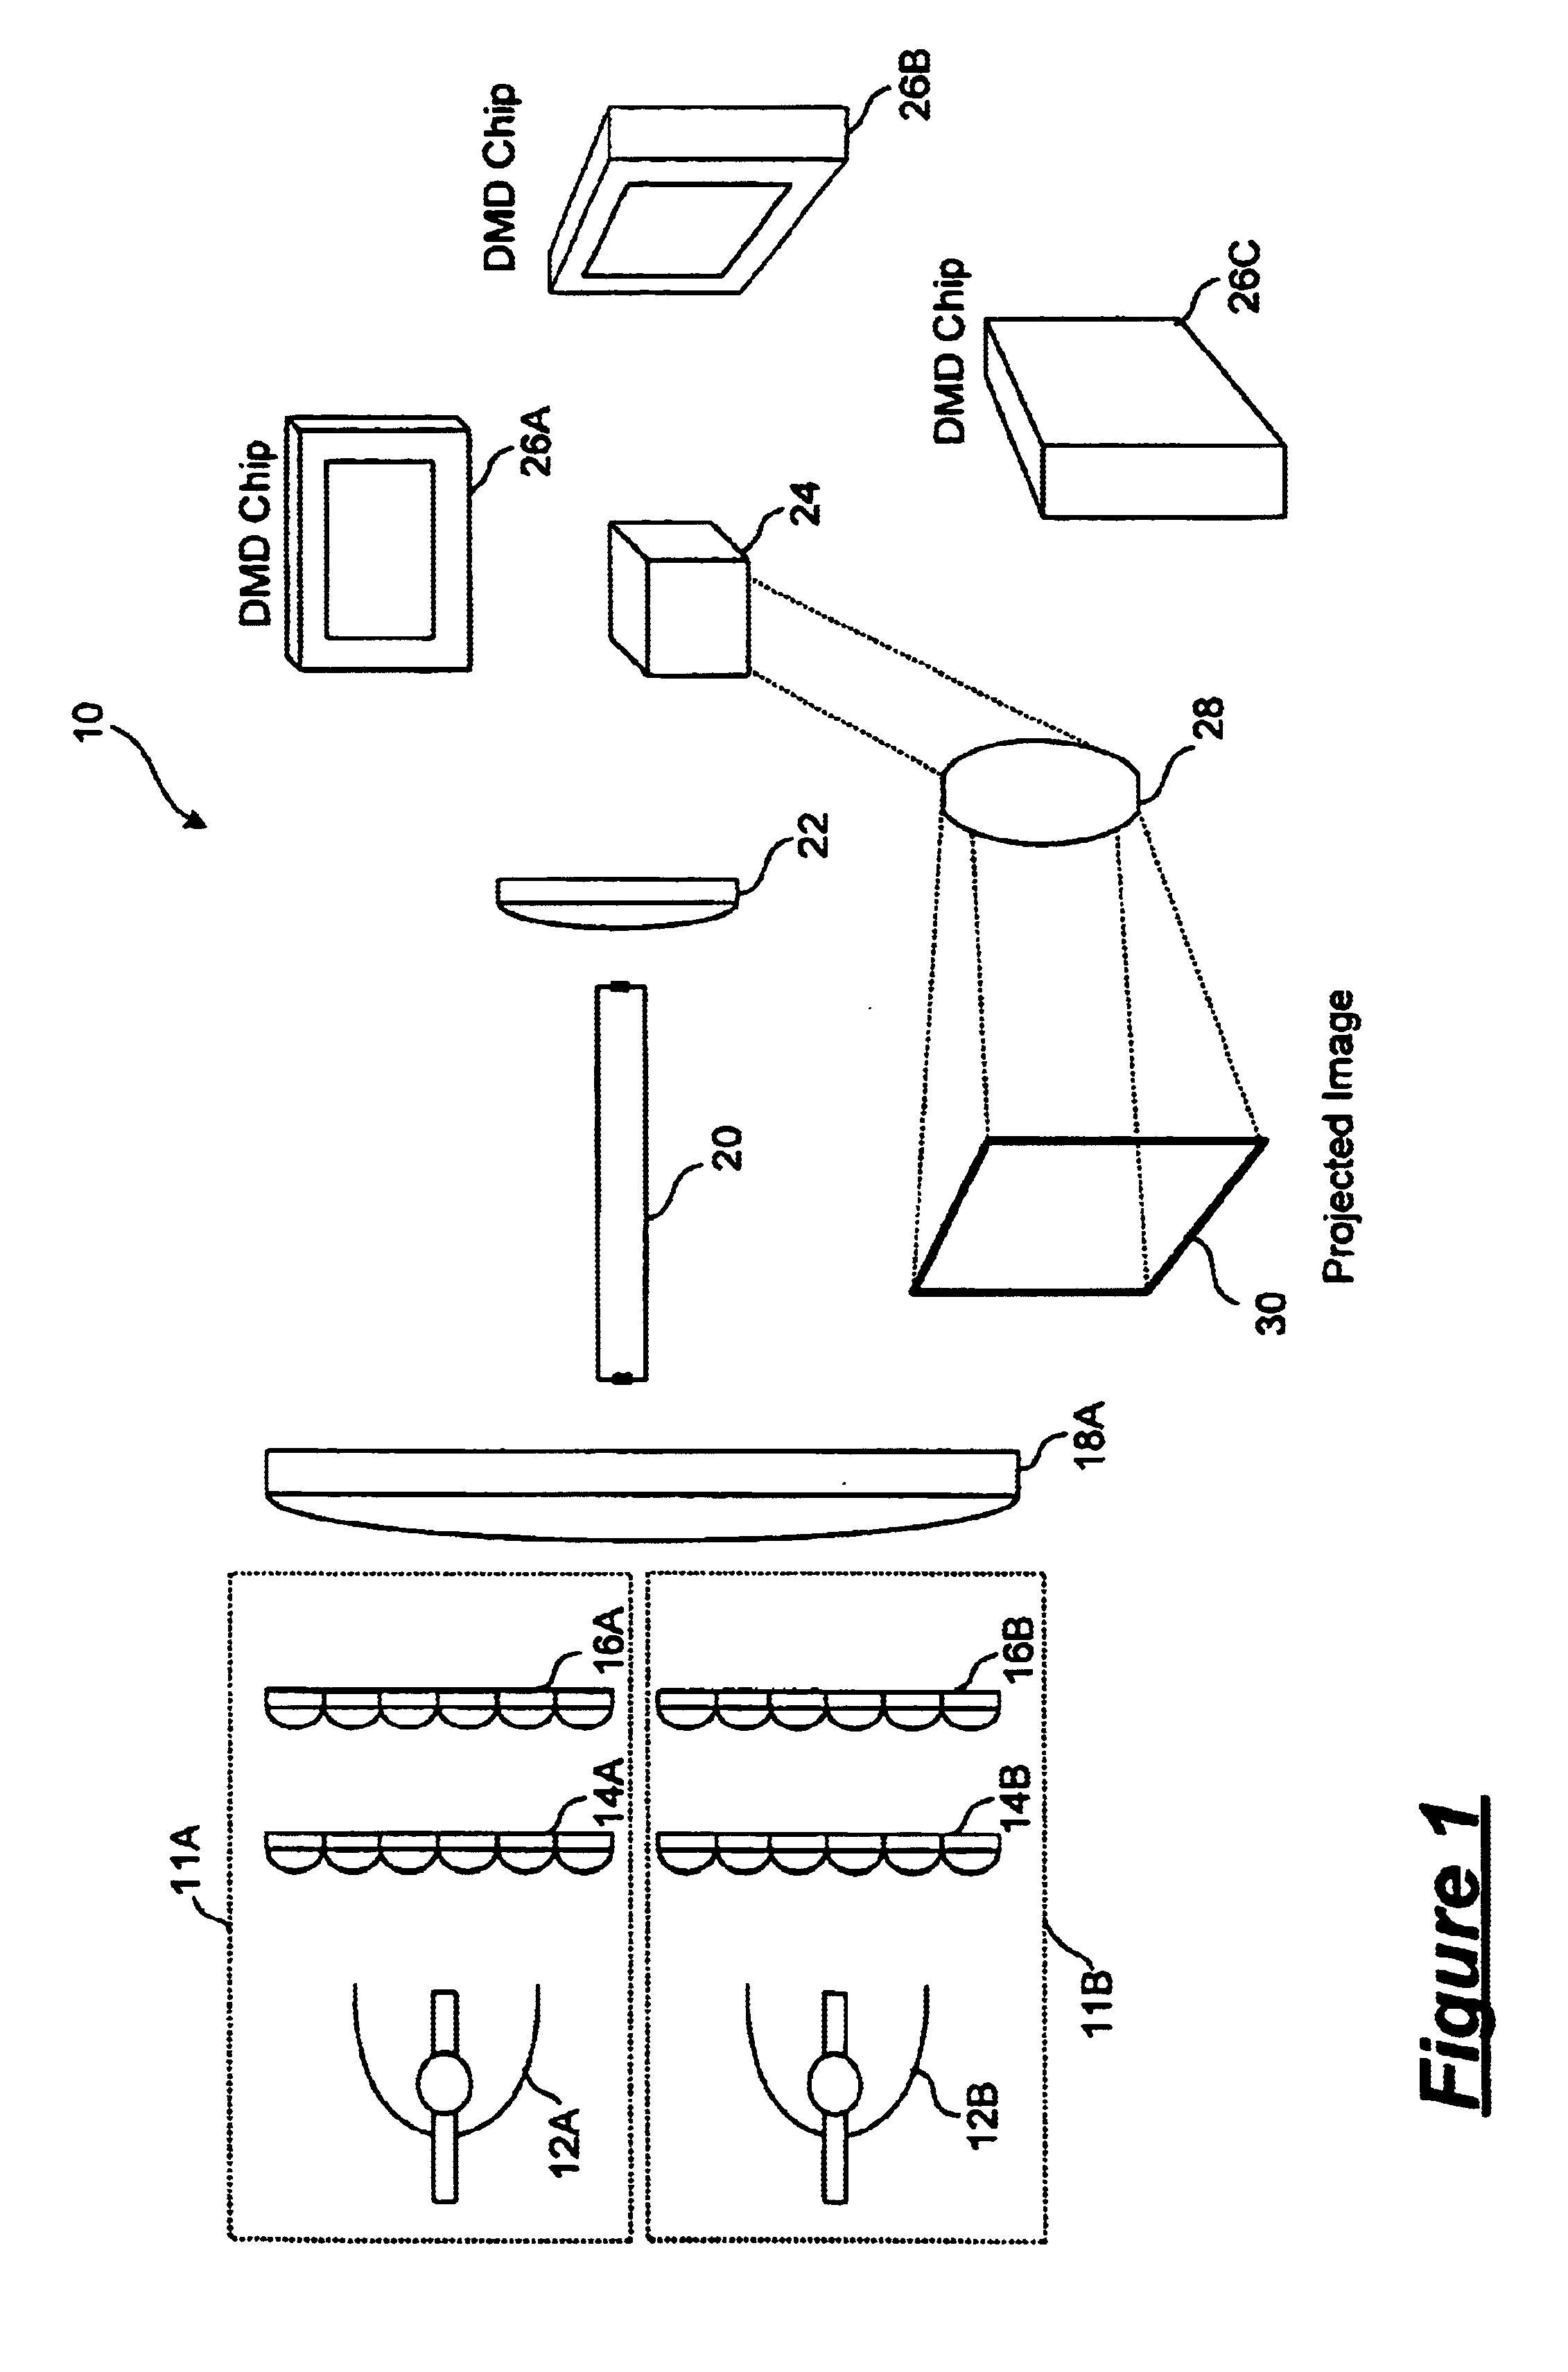 Illumination system for a projection system